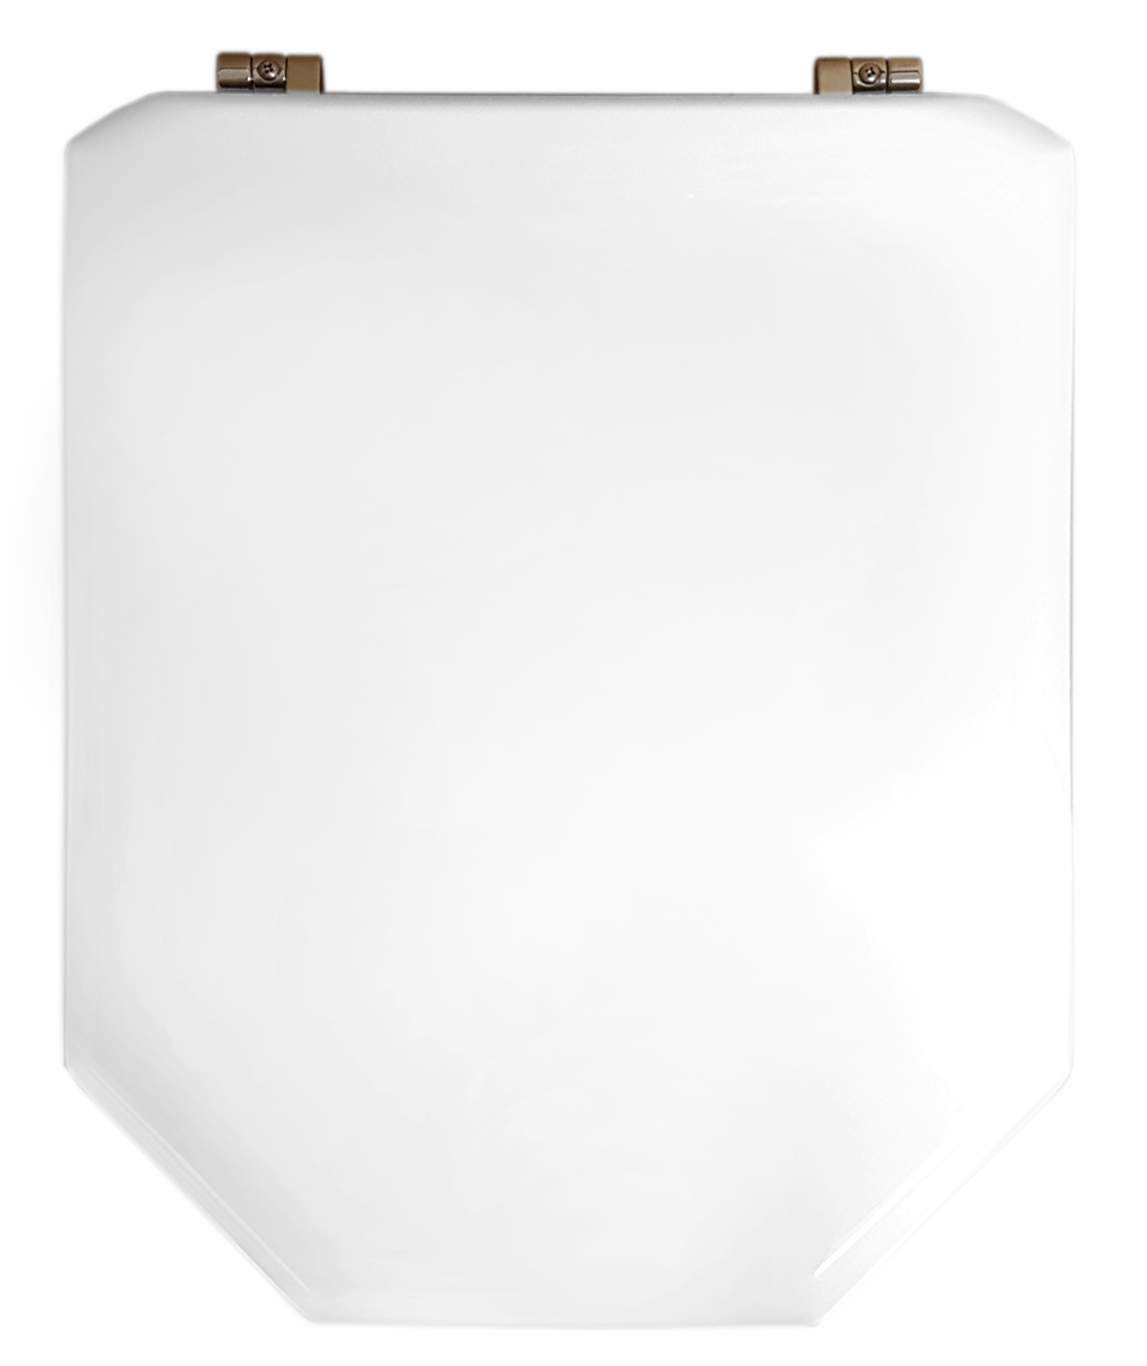 Toilet seat Equipage 1 white